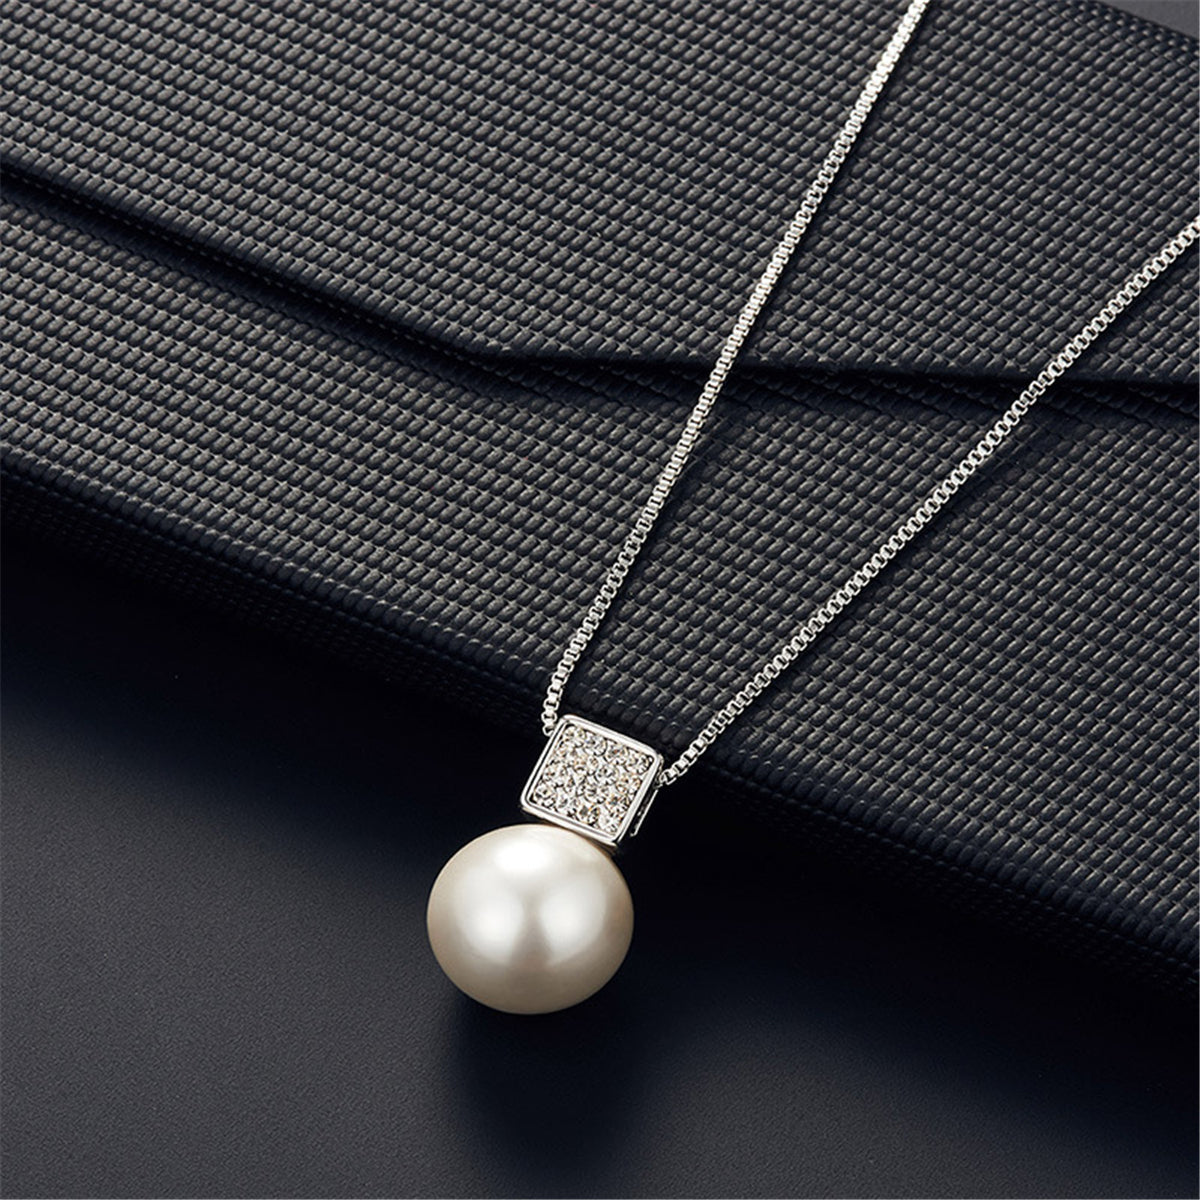 Pearl & Silver-Plated Pendant Necklace & Drop Earrings